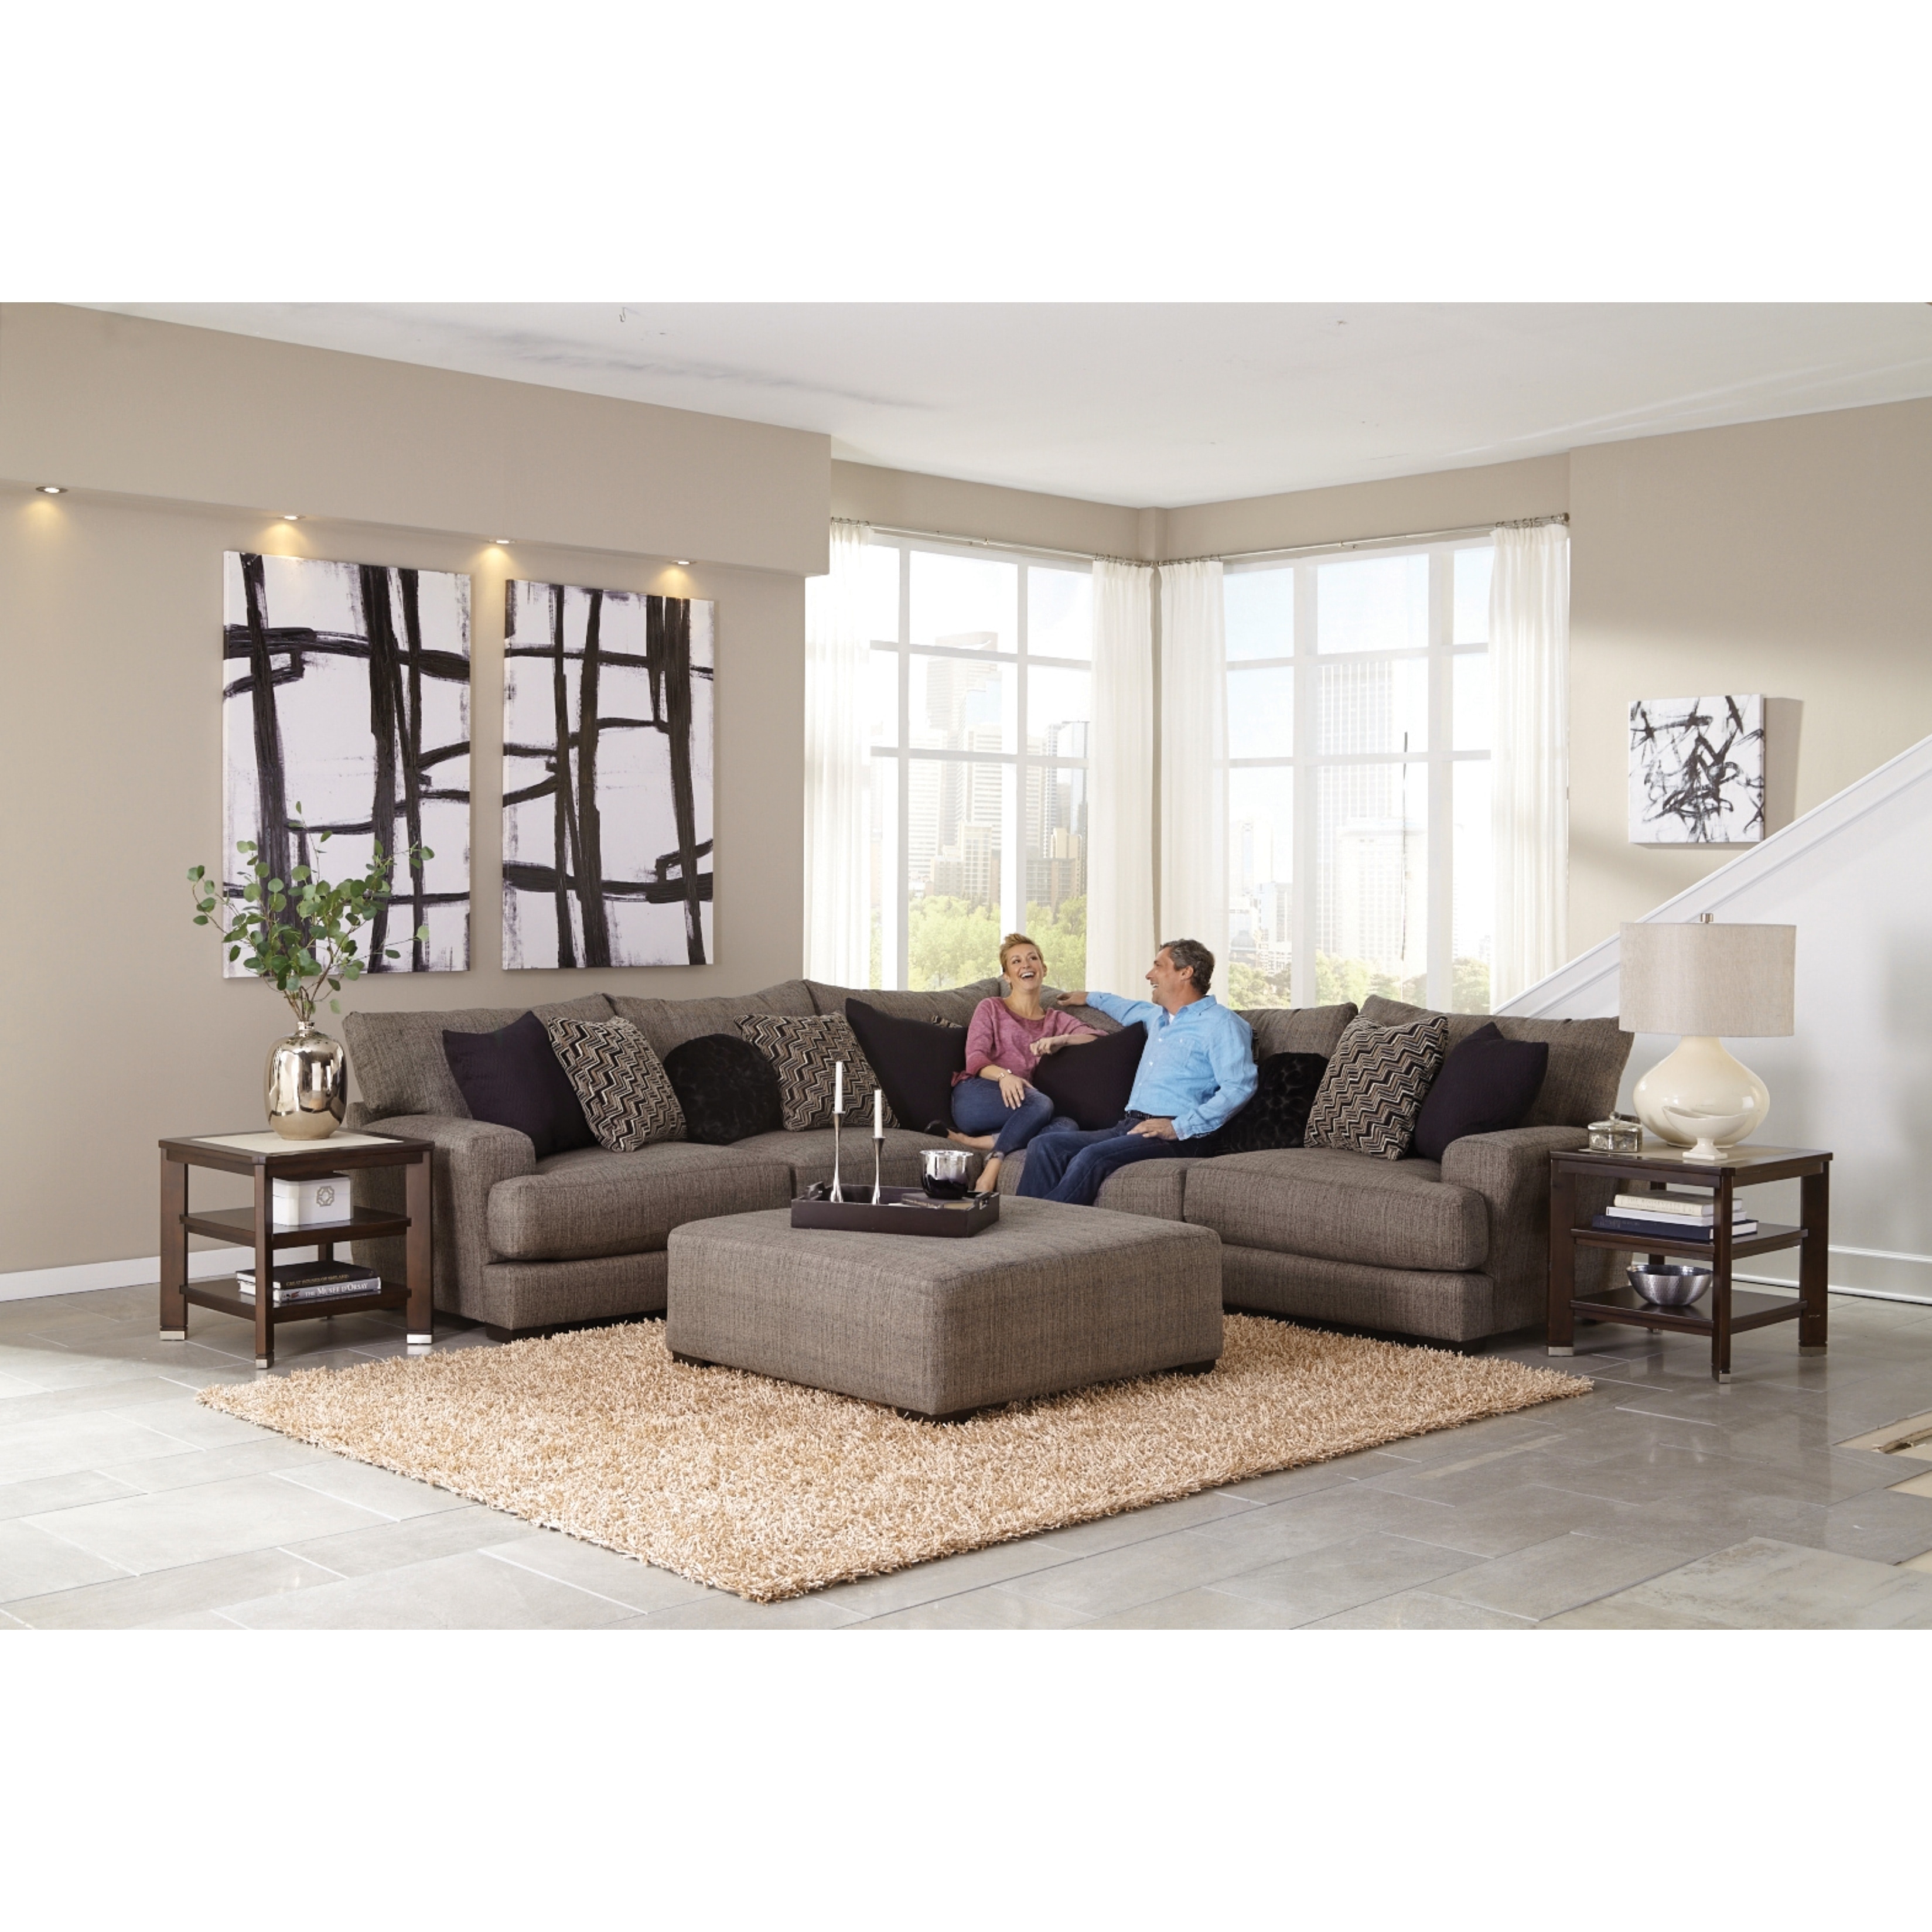 Padden Sectional Sofa And Ottoman Living Room Set On Sale Overstock 29593331